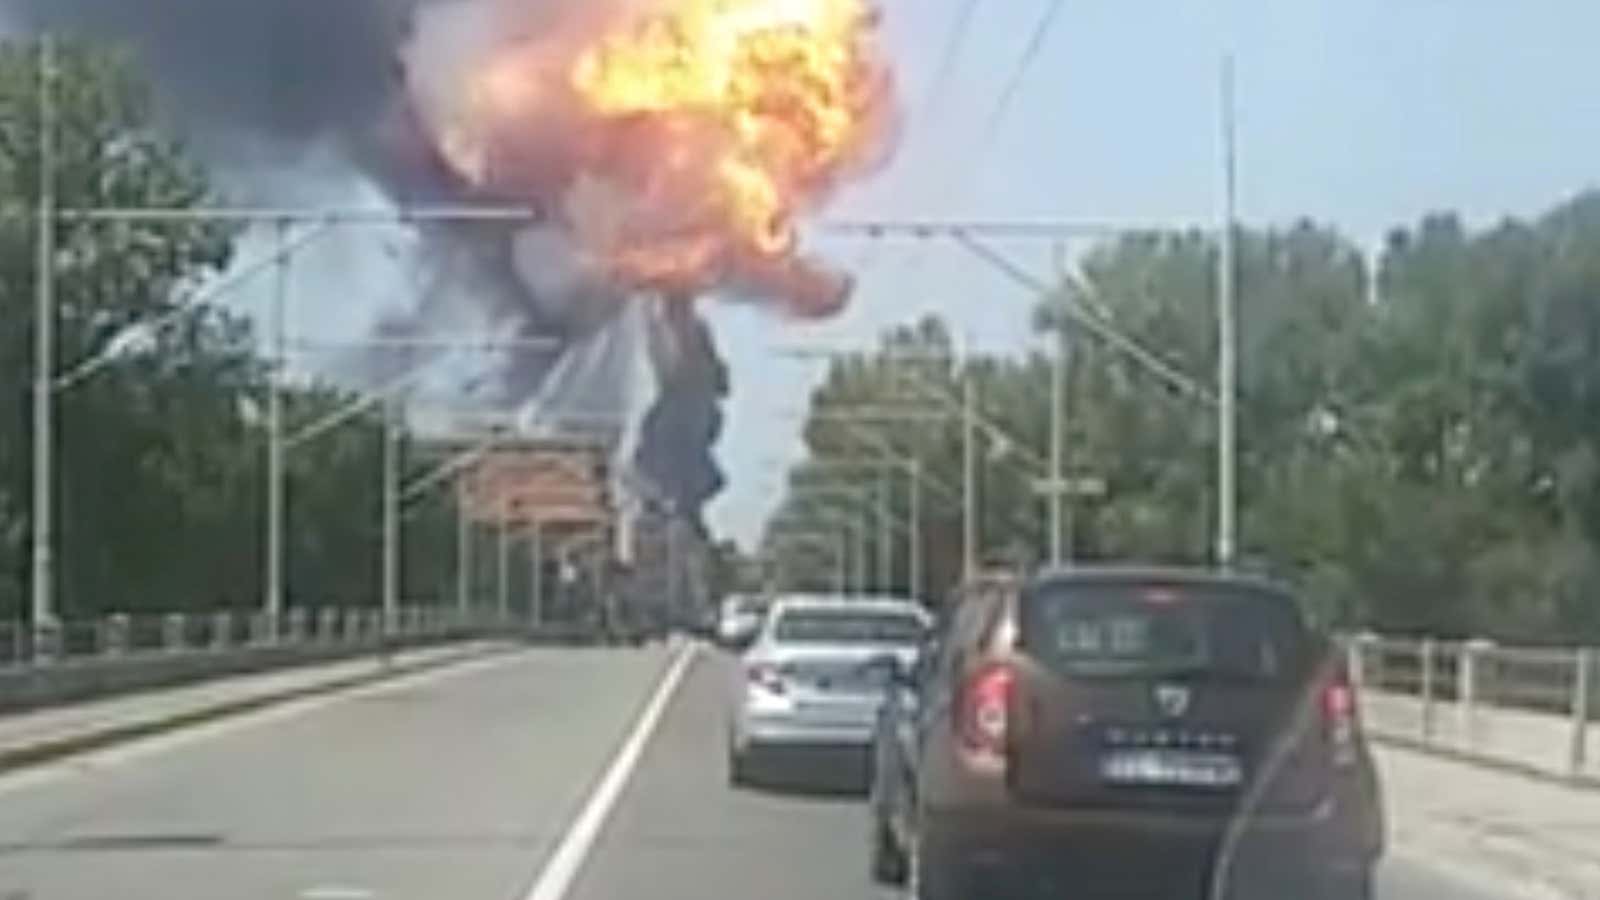 An explosion is seen at Borgo Panigale, on the outskirts of Bologna, Italy on Aug. 6, 2018.